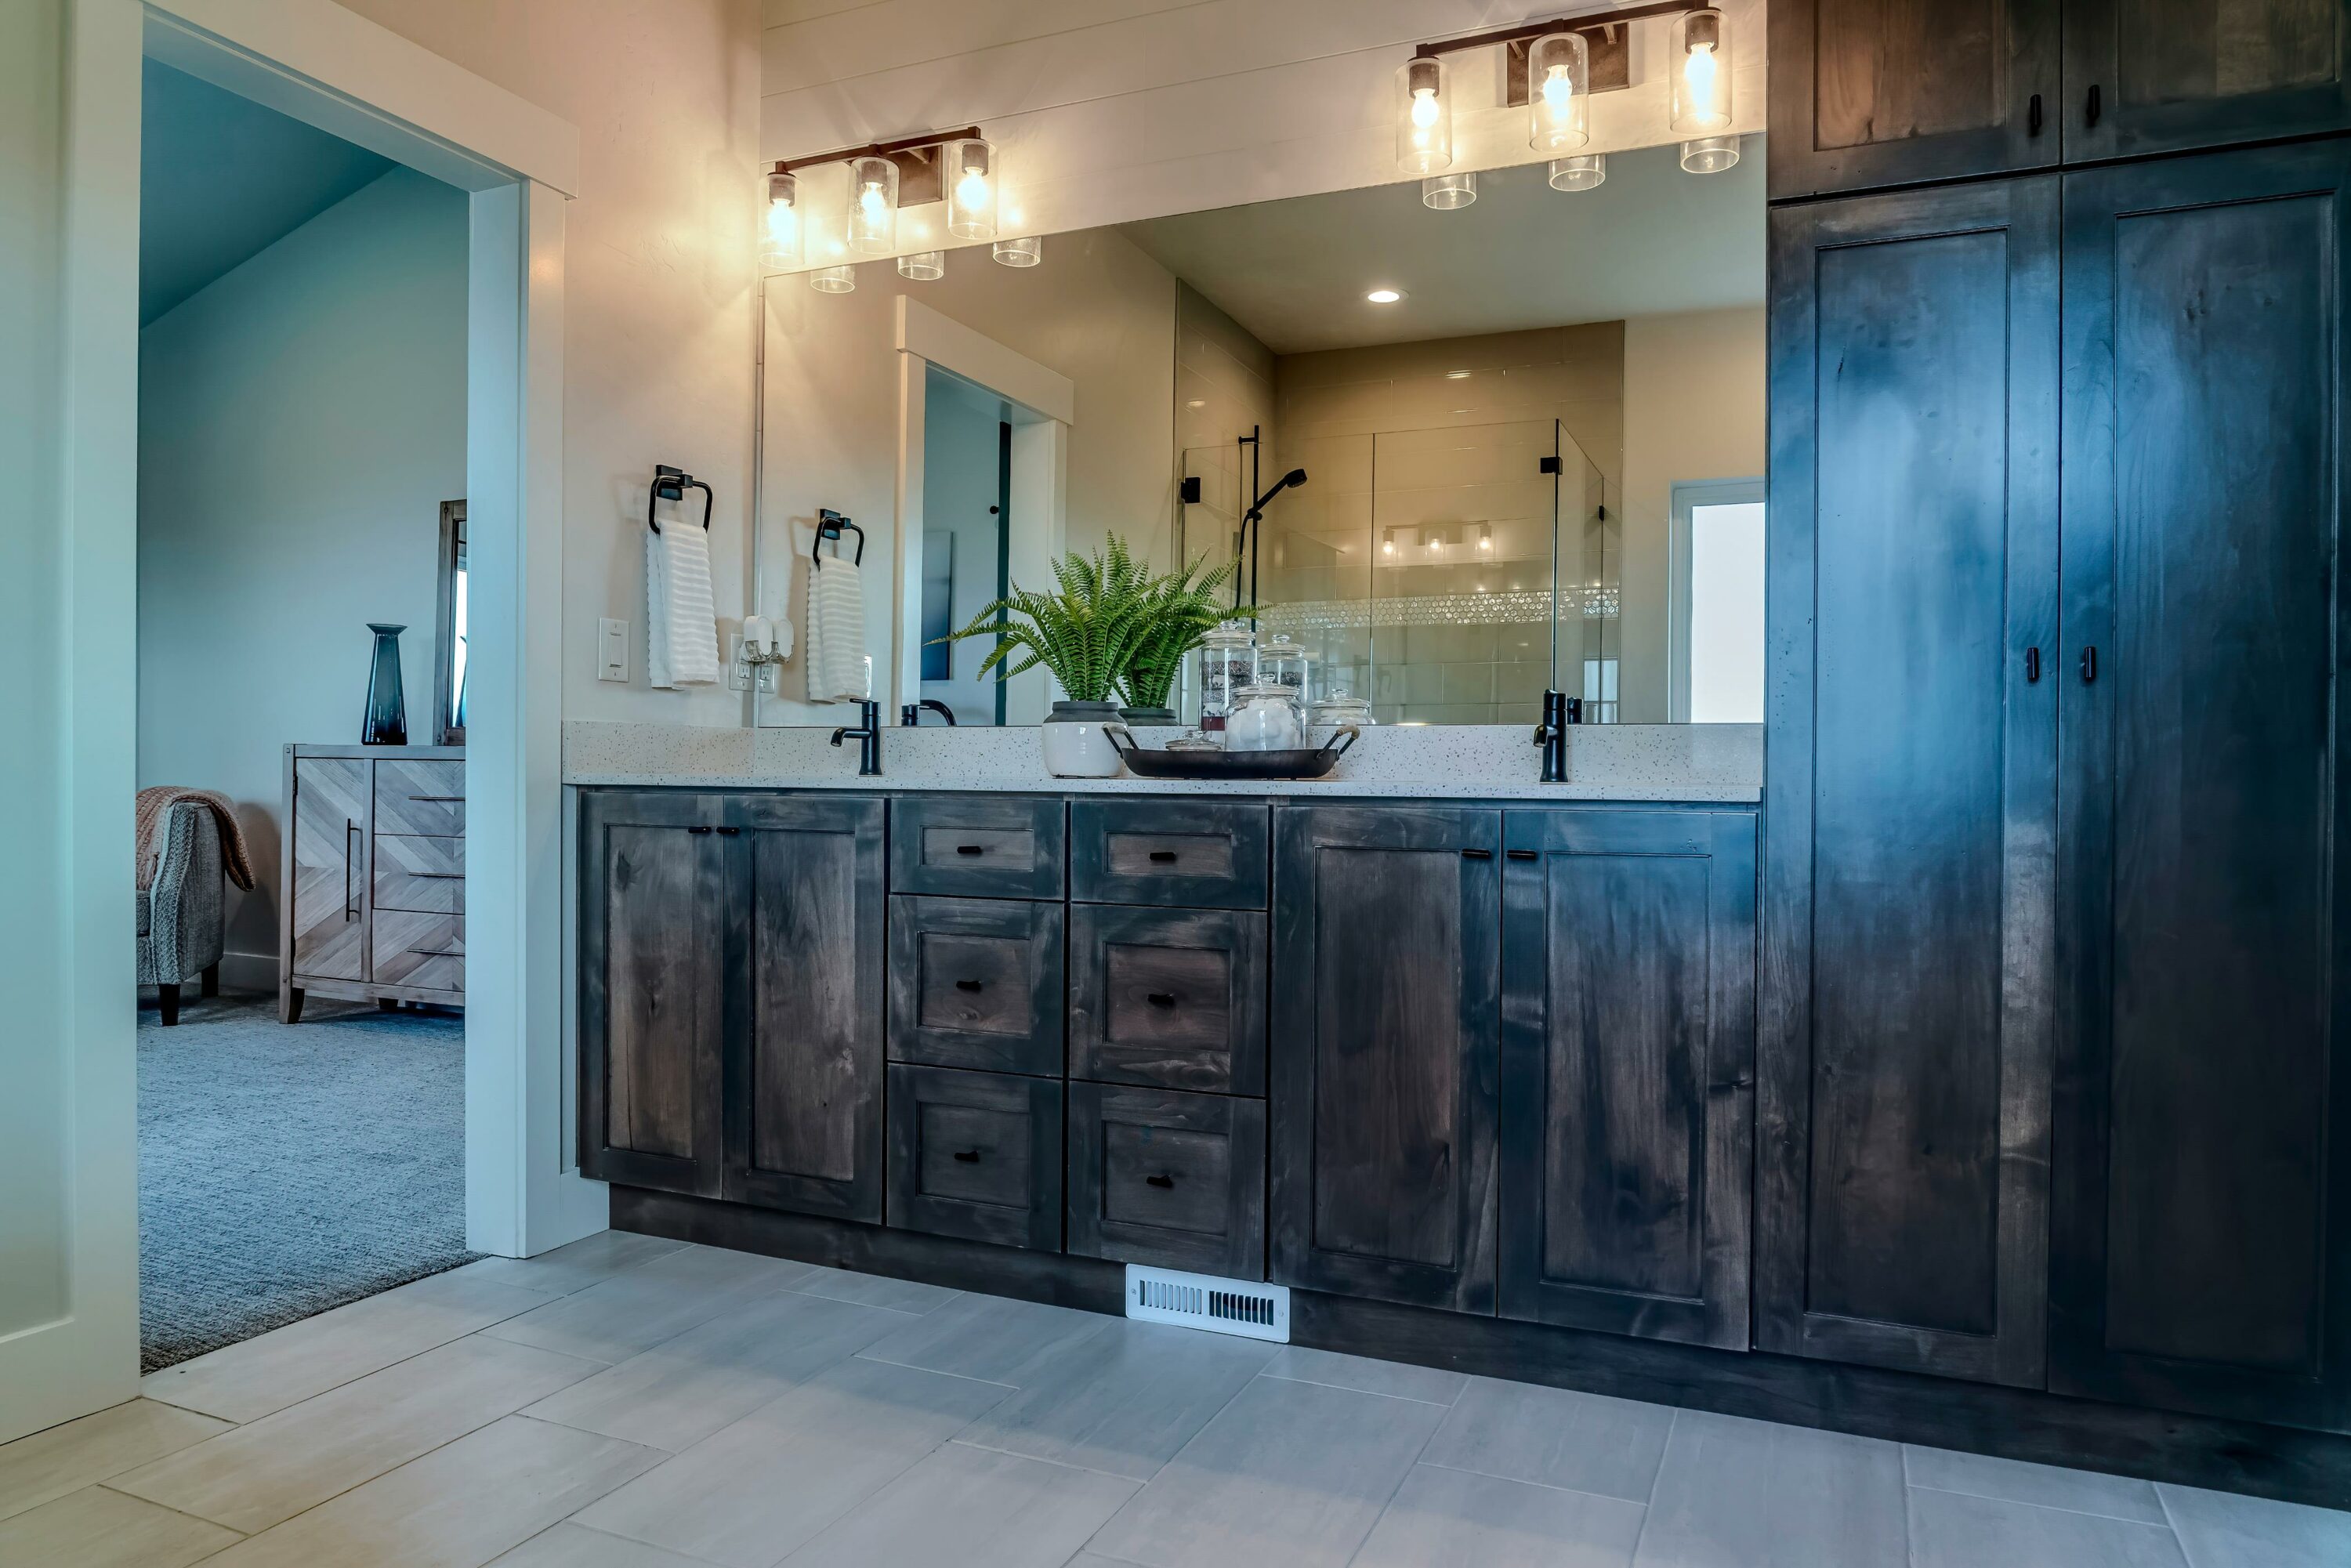 A bathroom with a dark wooden countertop, cabinets, and vanity